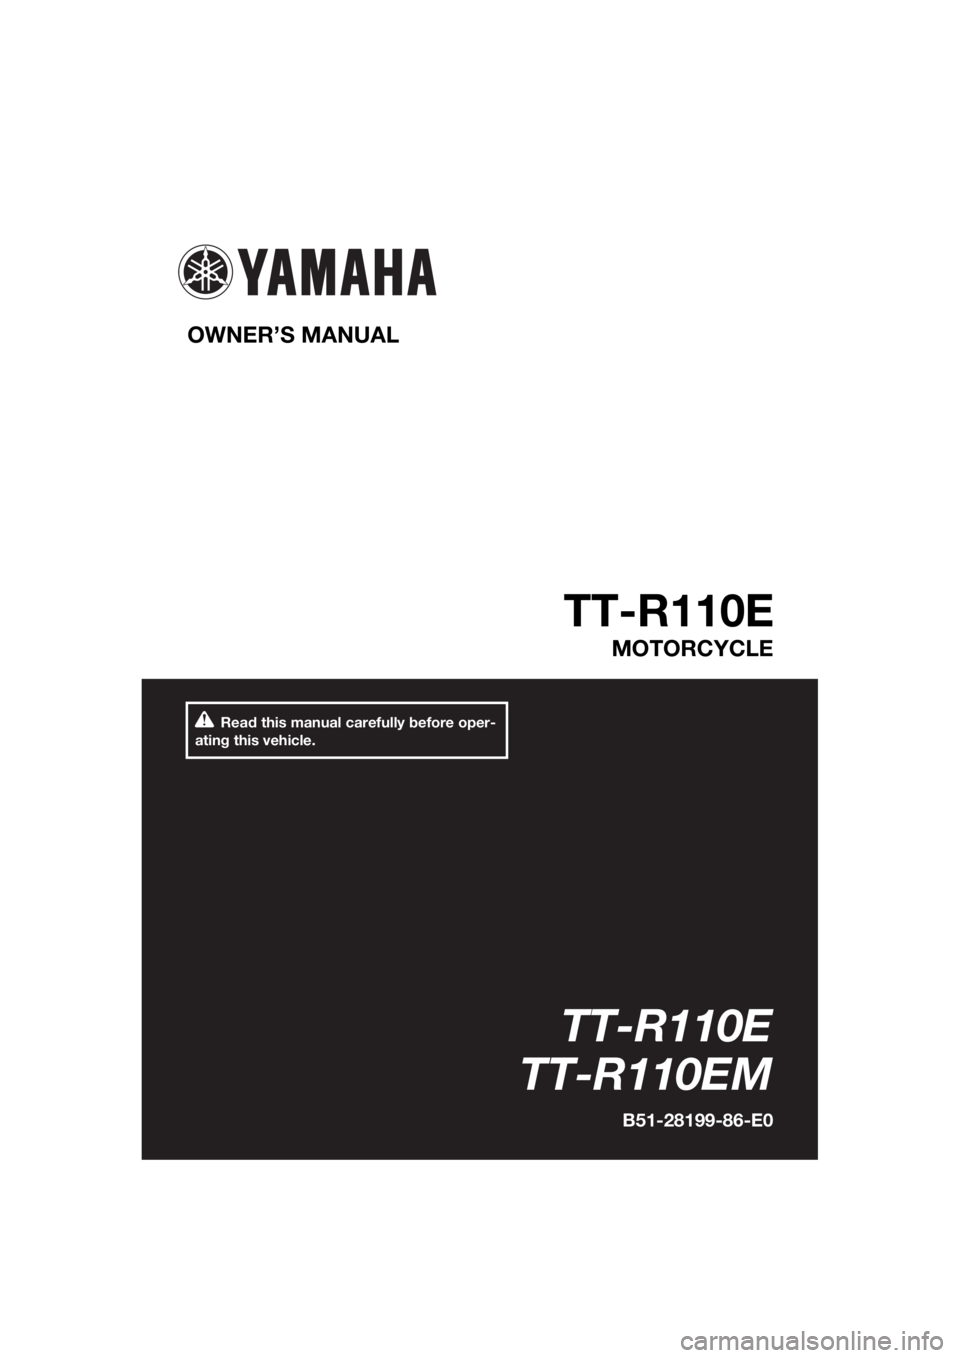 YAMAHA TT-R110E 2021  Owners Manual Read this manual carefully before oper-
ating this vehicle.
OWNER’S MANUAL 
TT-R110E
MOTORCYCLE
TT-R110E
TT-R110EM
B51-28199-86-E0
UB5186E0.book  Page 1  Wednesday, April 22, 2020  9:11 AM 